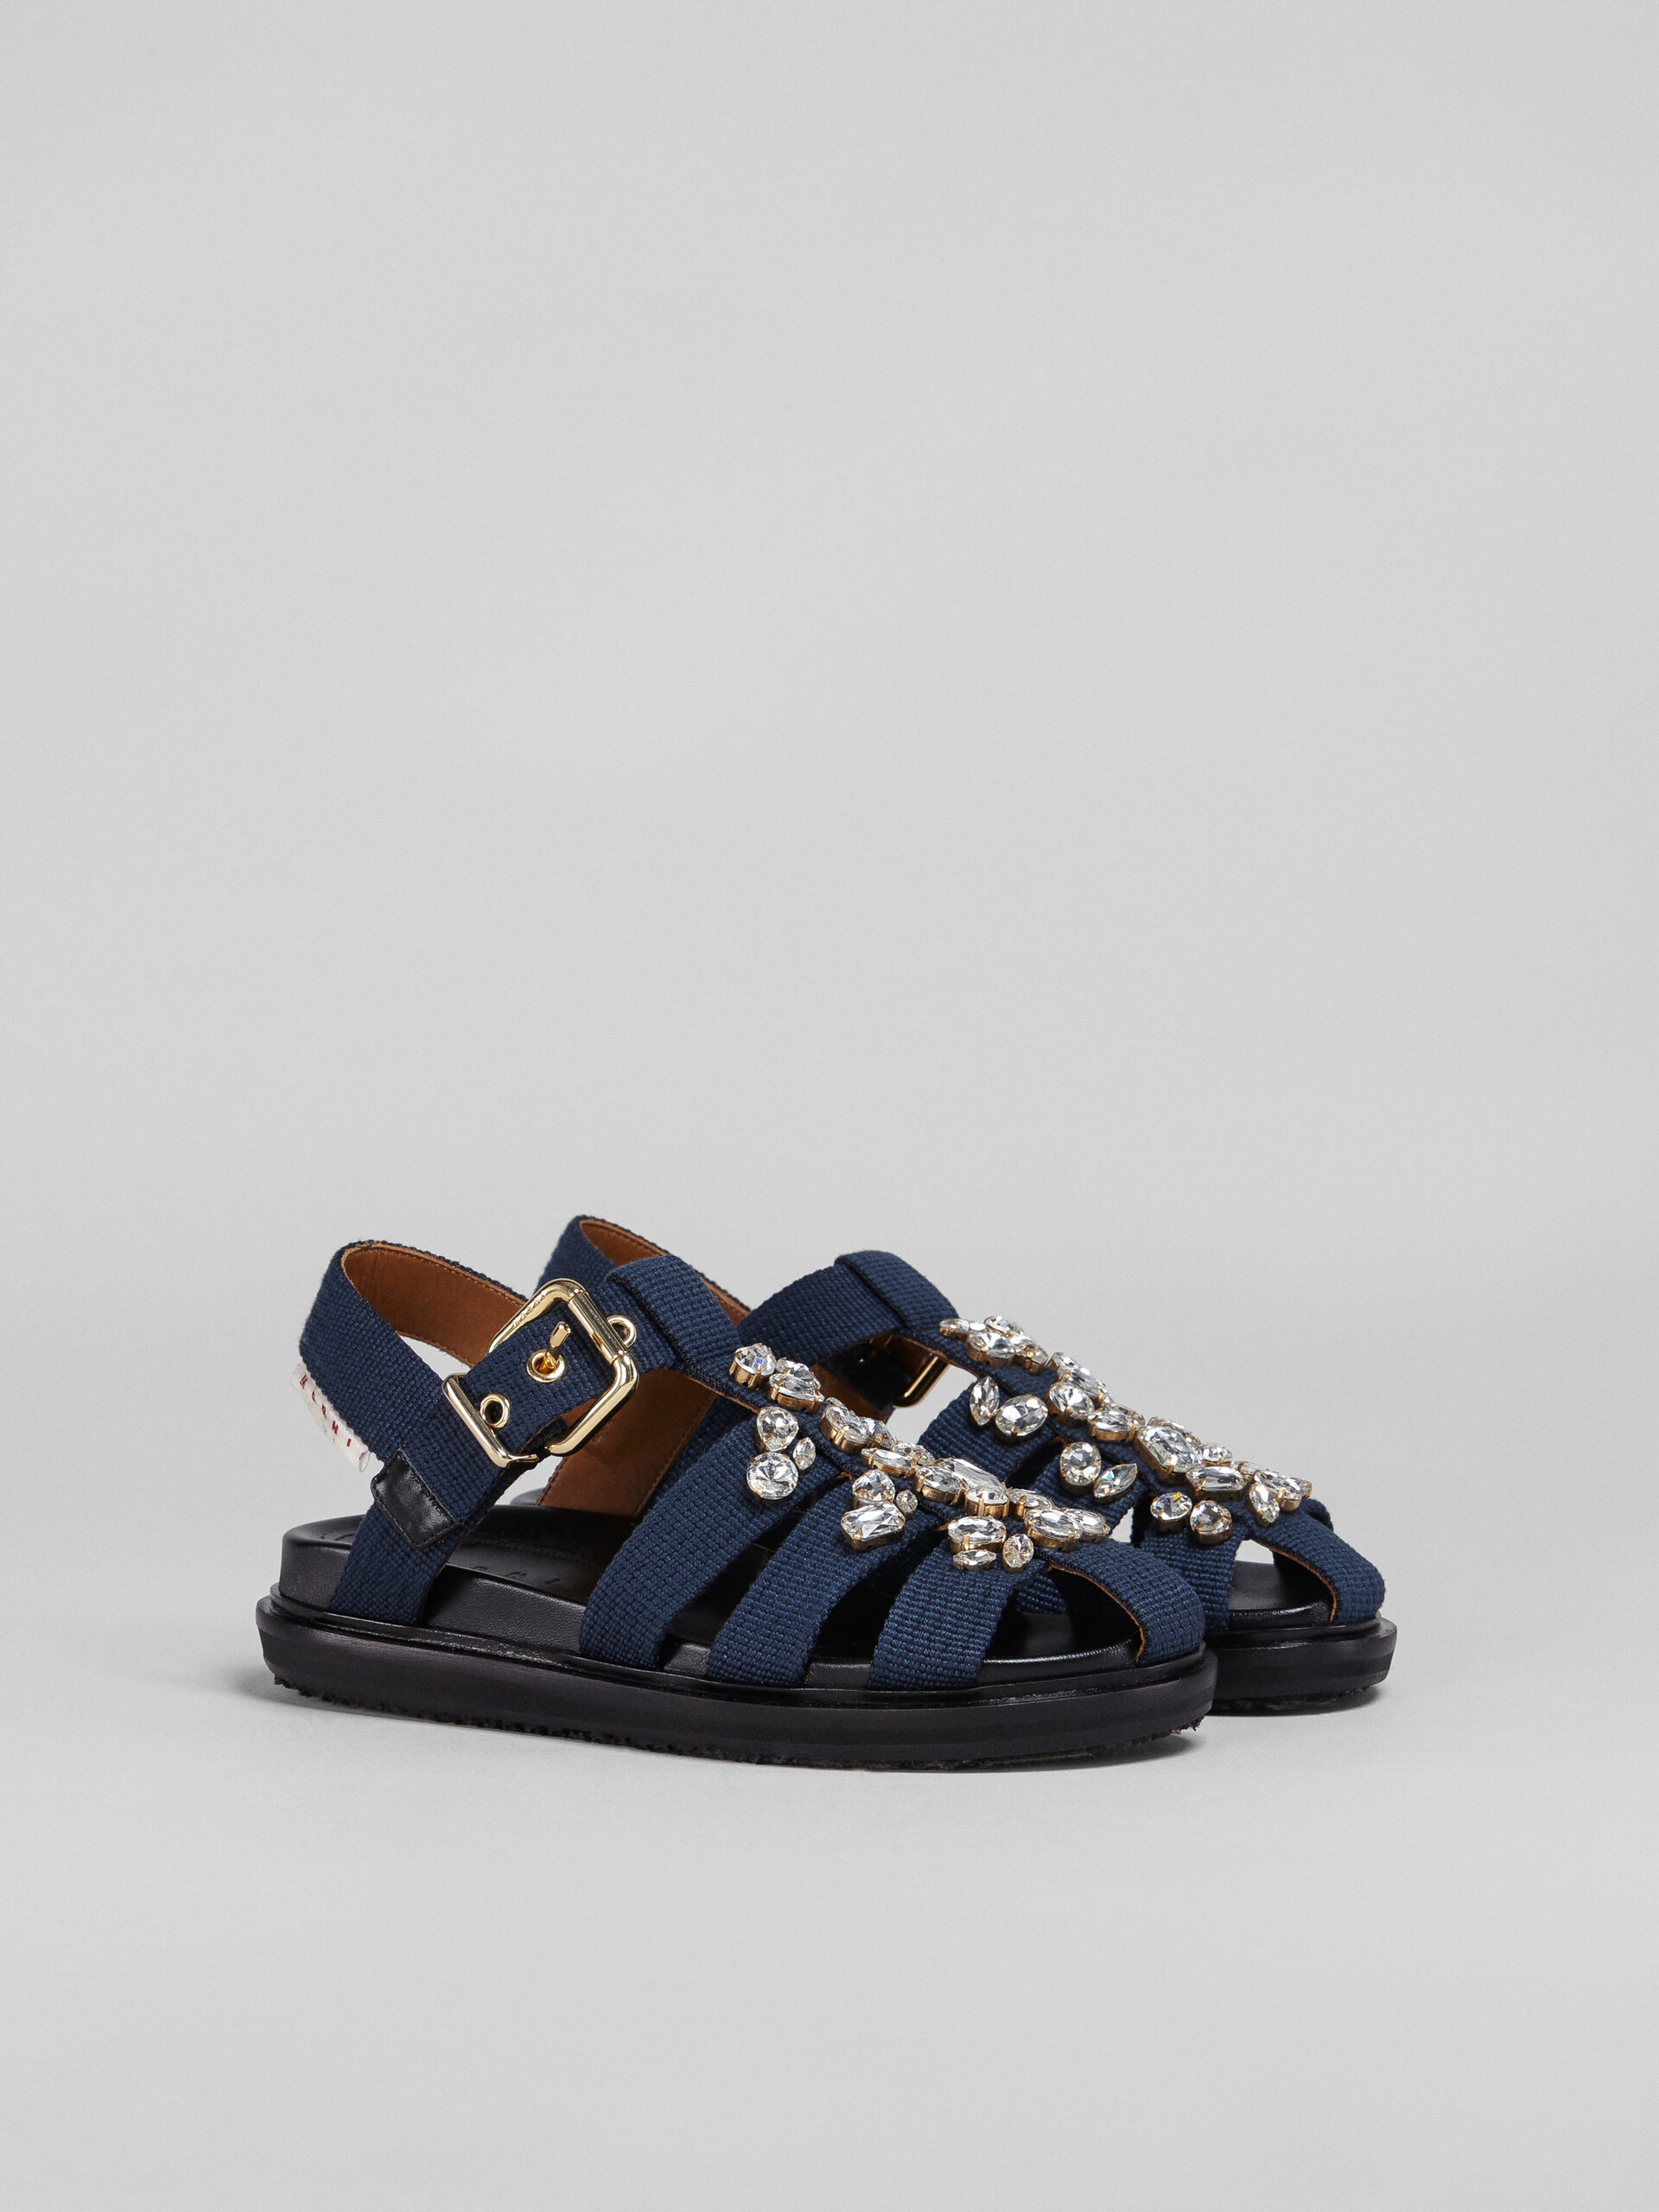 Blue ribbon Fussbett sandal with glass beads - Sandals - Image 2